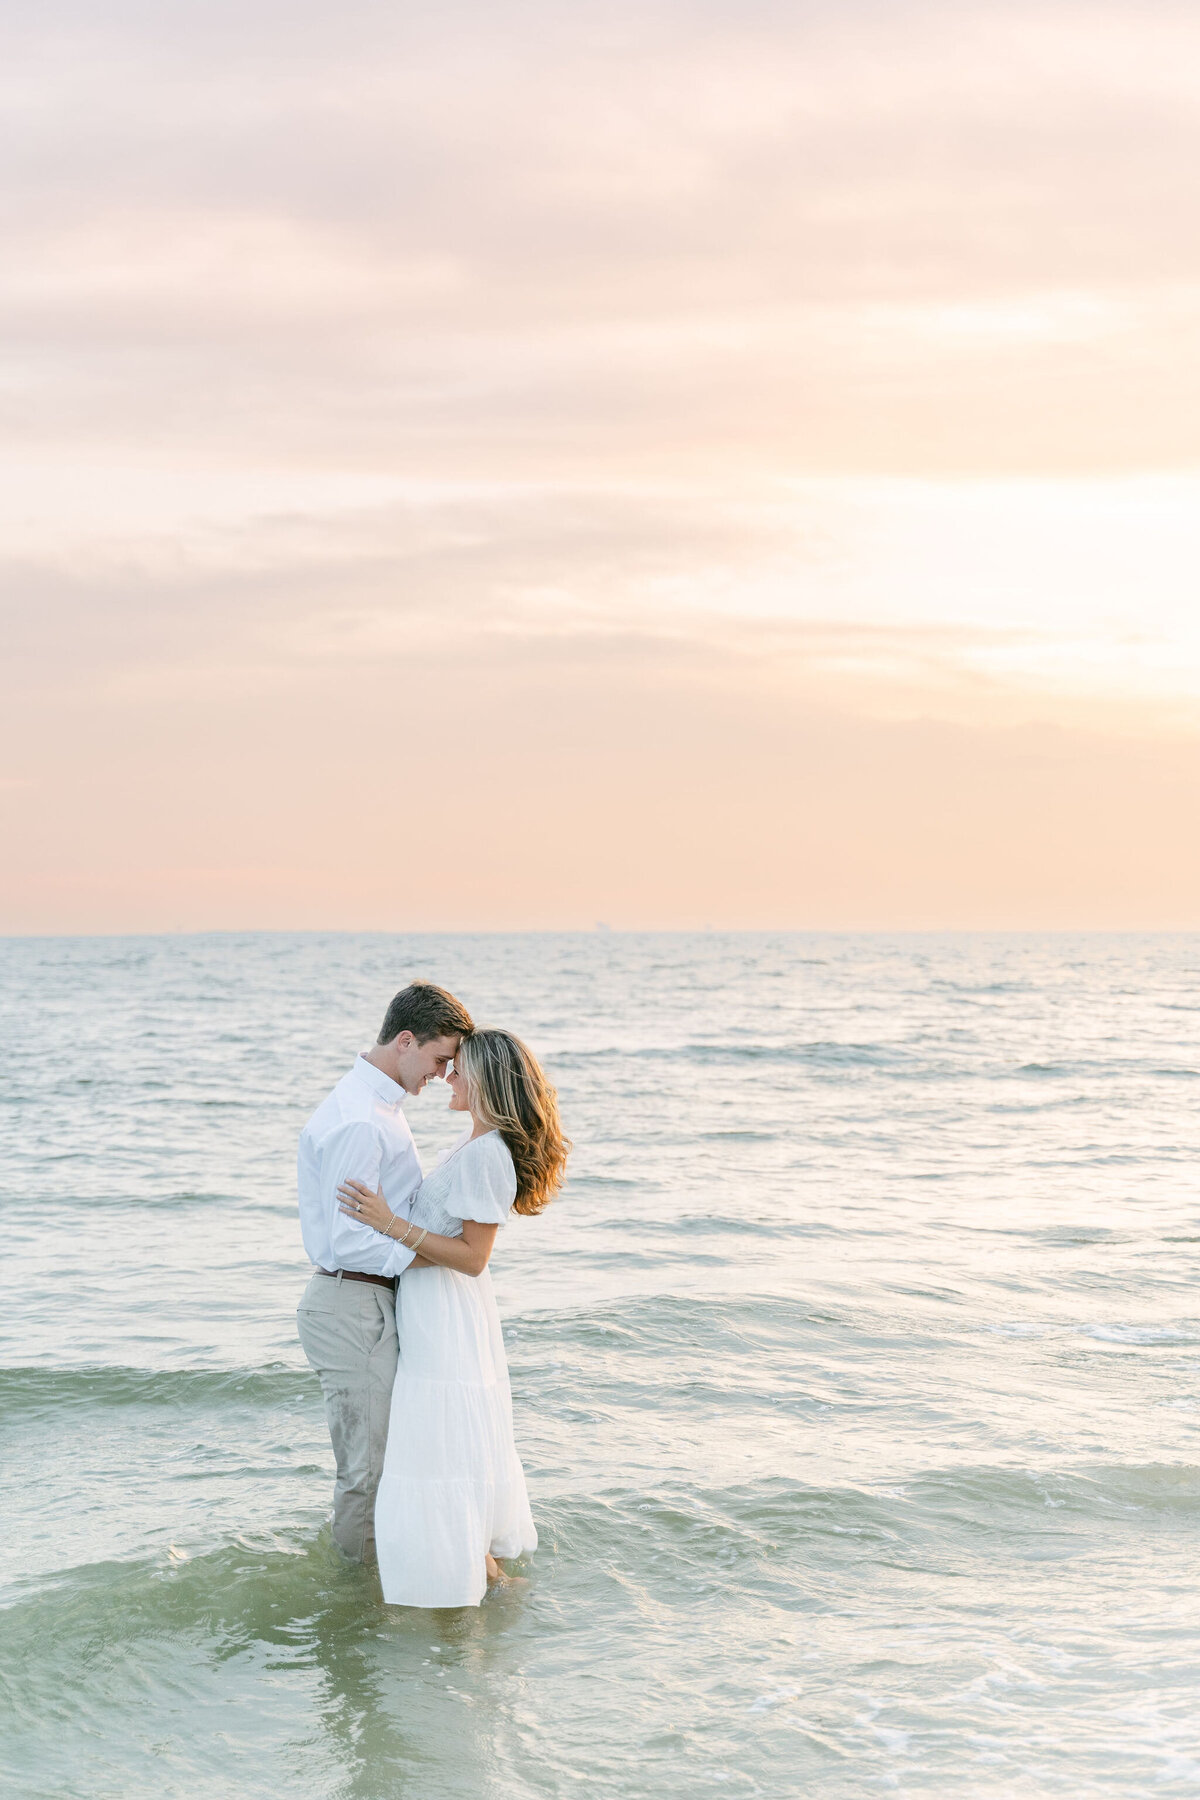 man and woman embracing while standing in the ocean